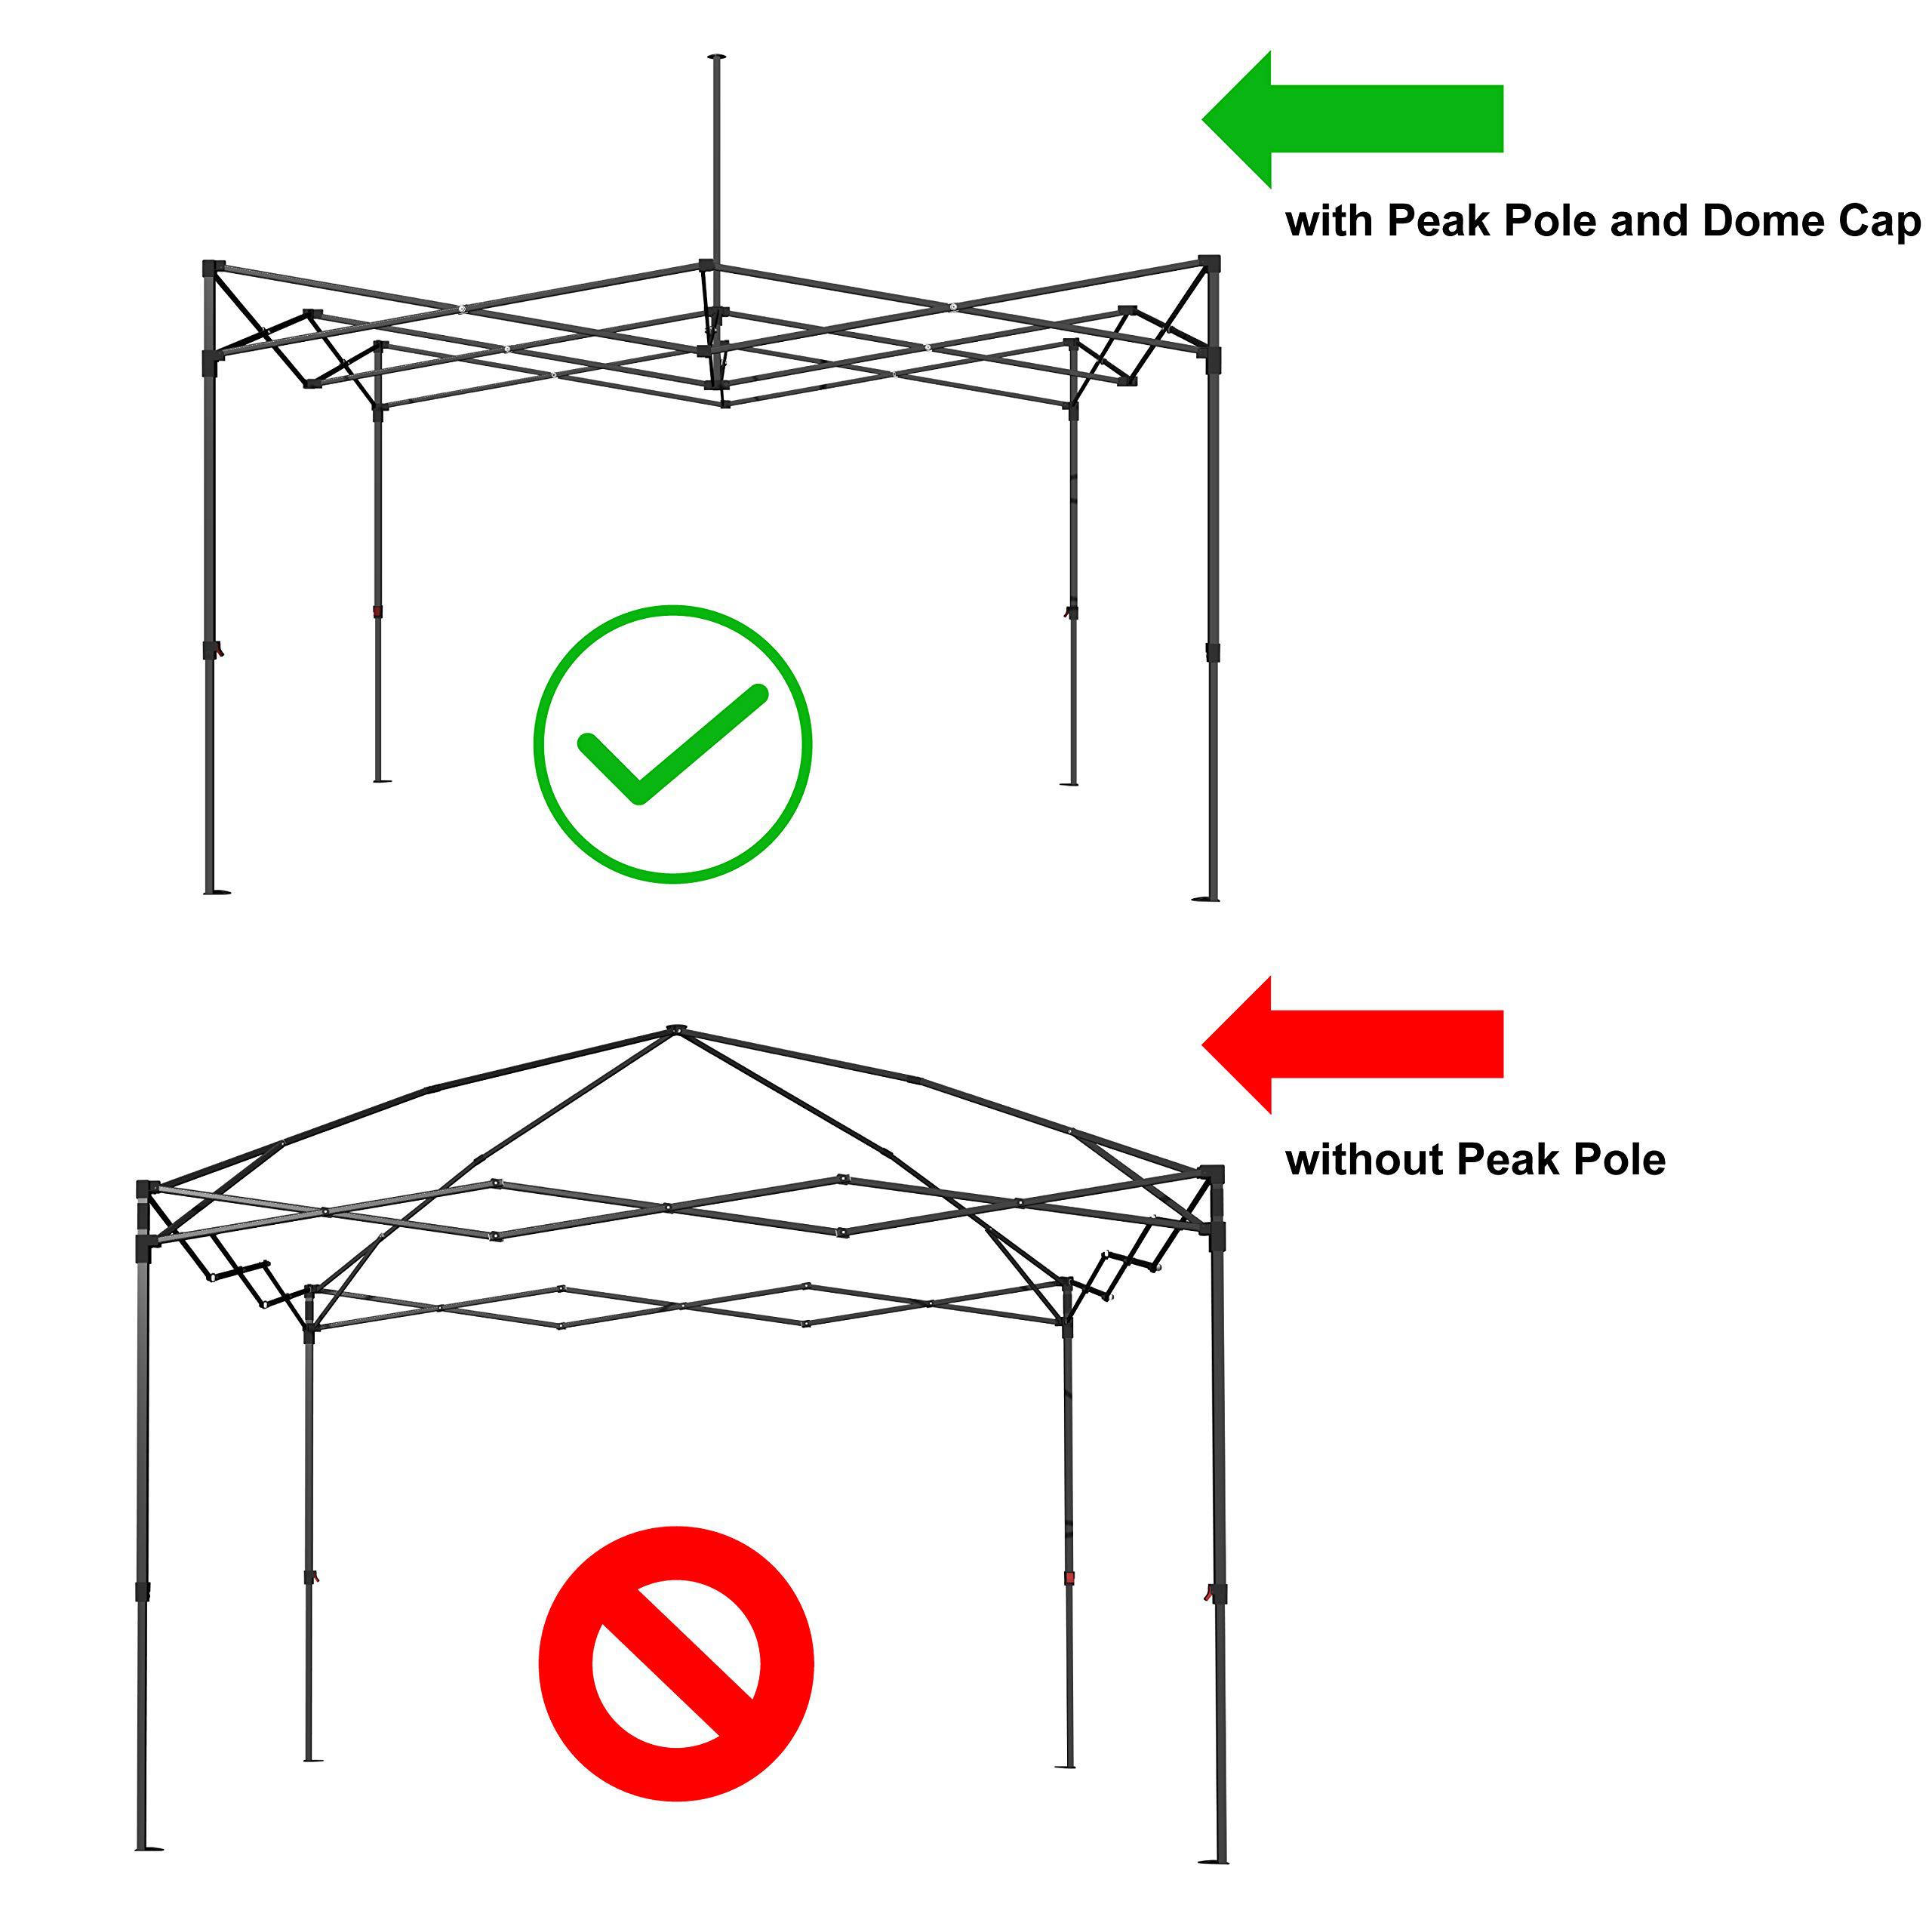 abccanopy replacement canopy top for pop up canopy tent (10x10,pink)